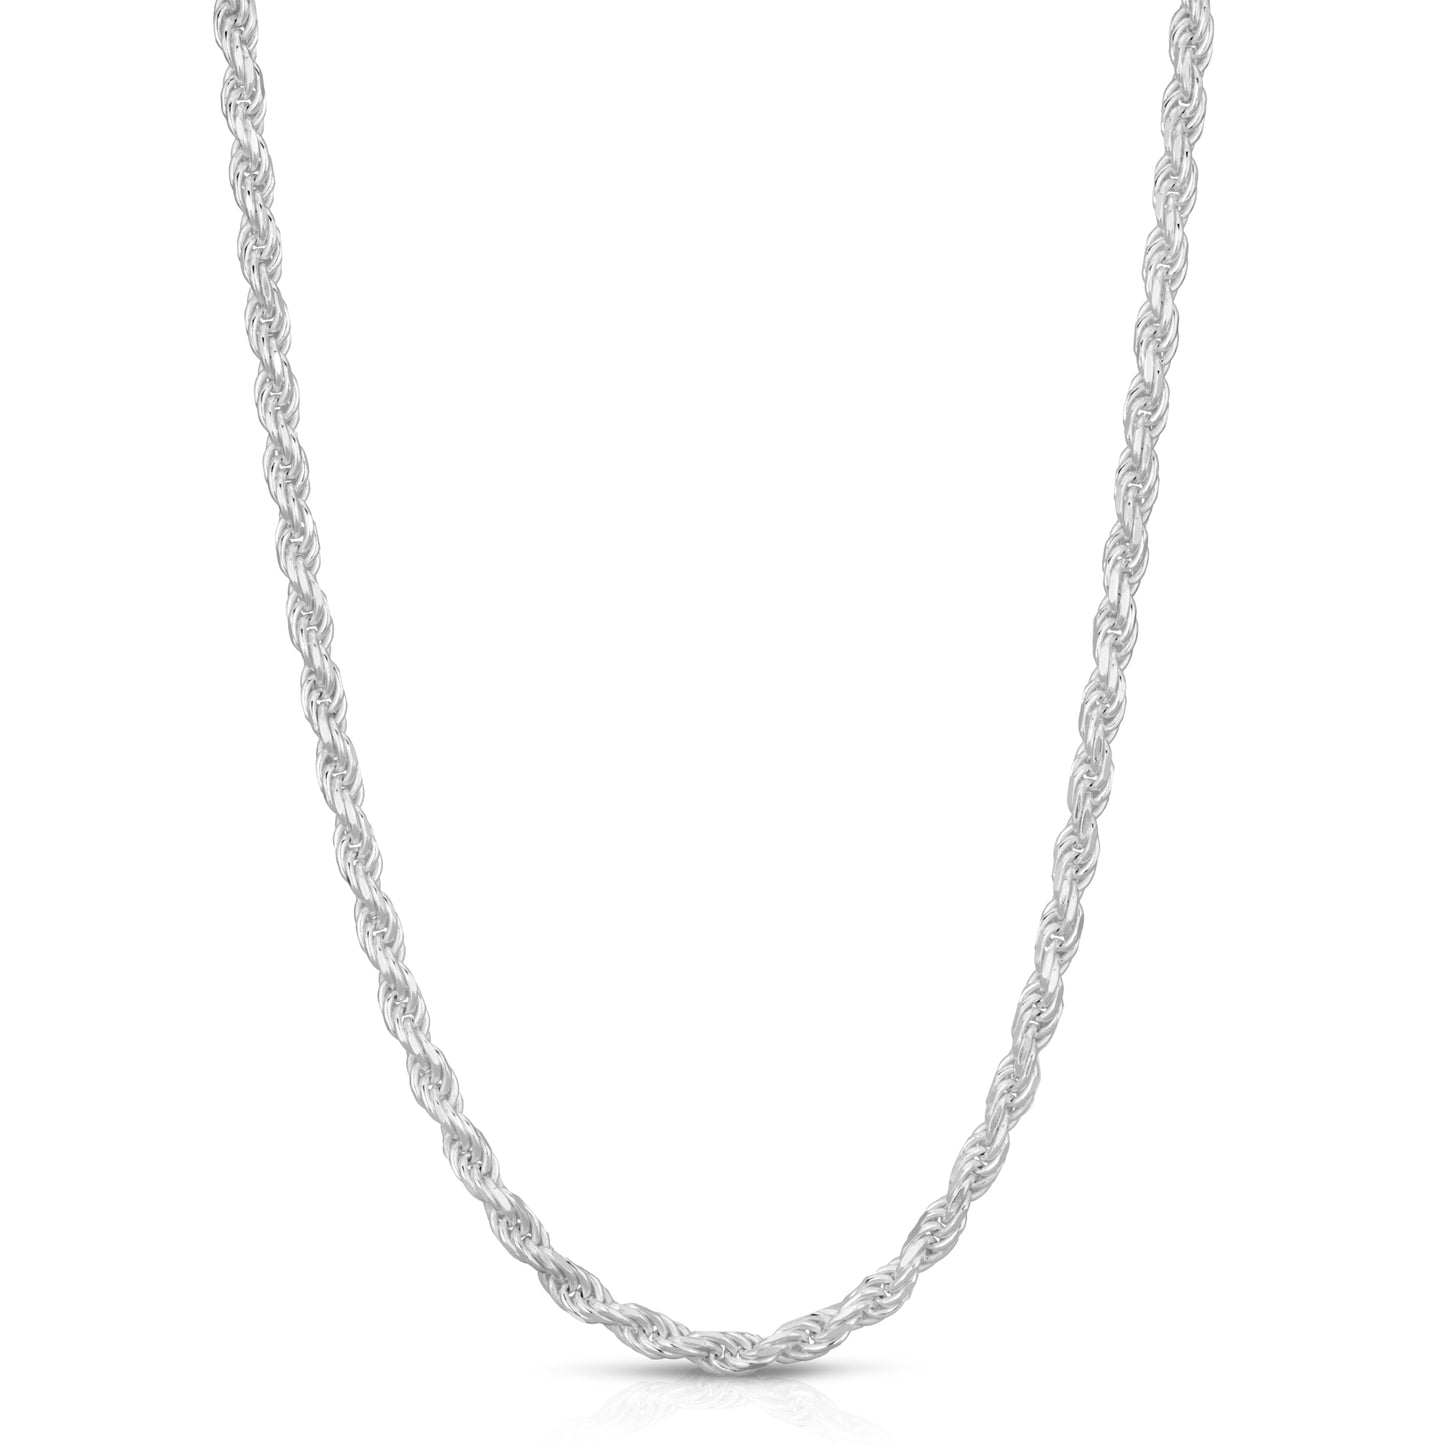 925 Sterling Silver 3mm Rope Chain Necklace 24 Inches